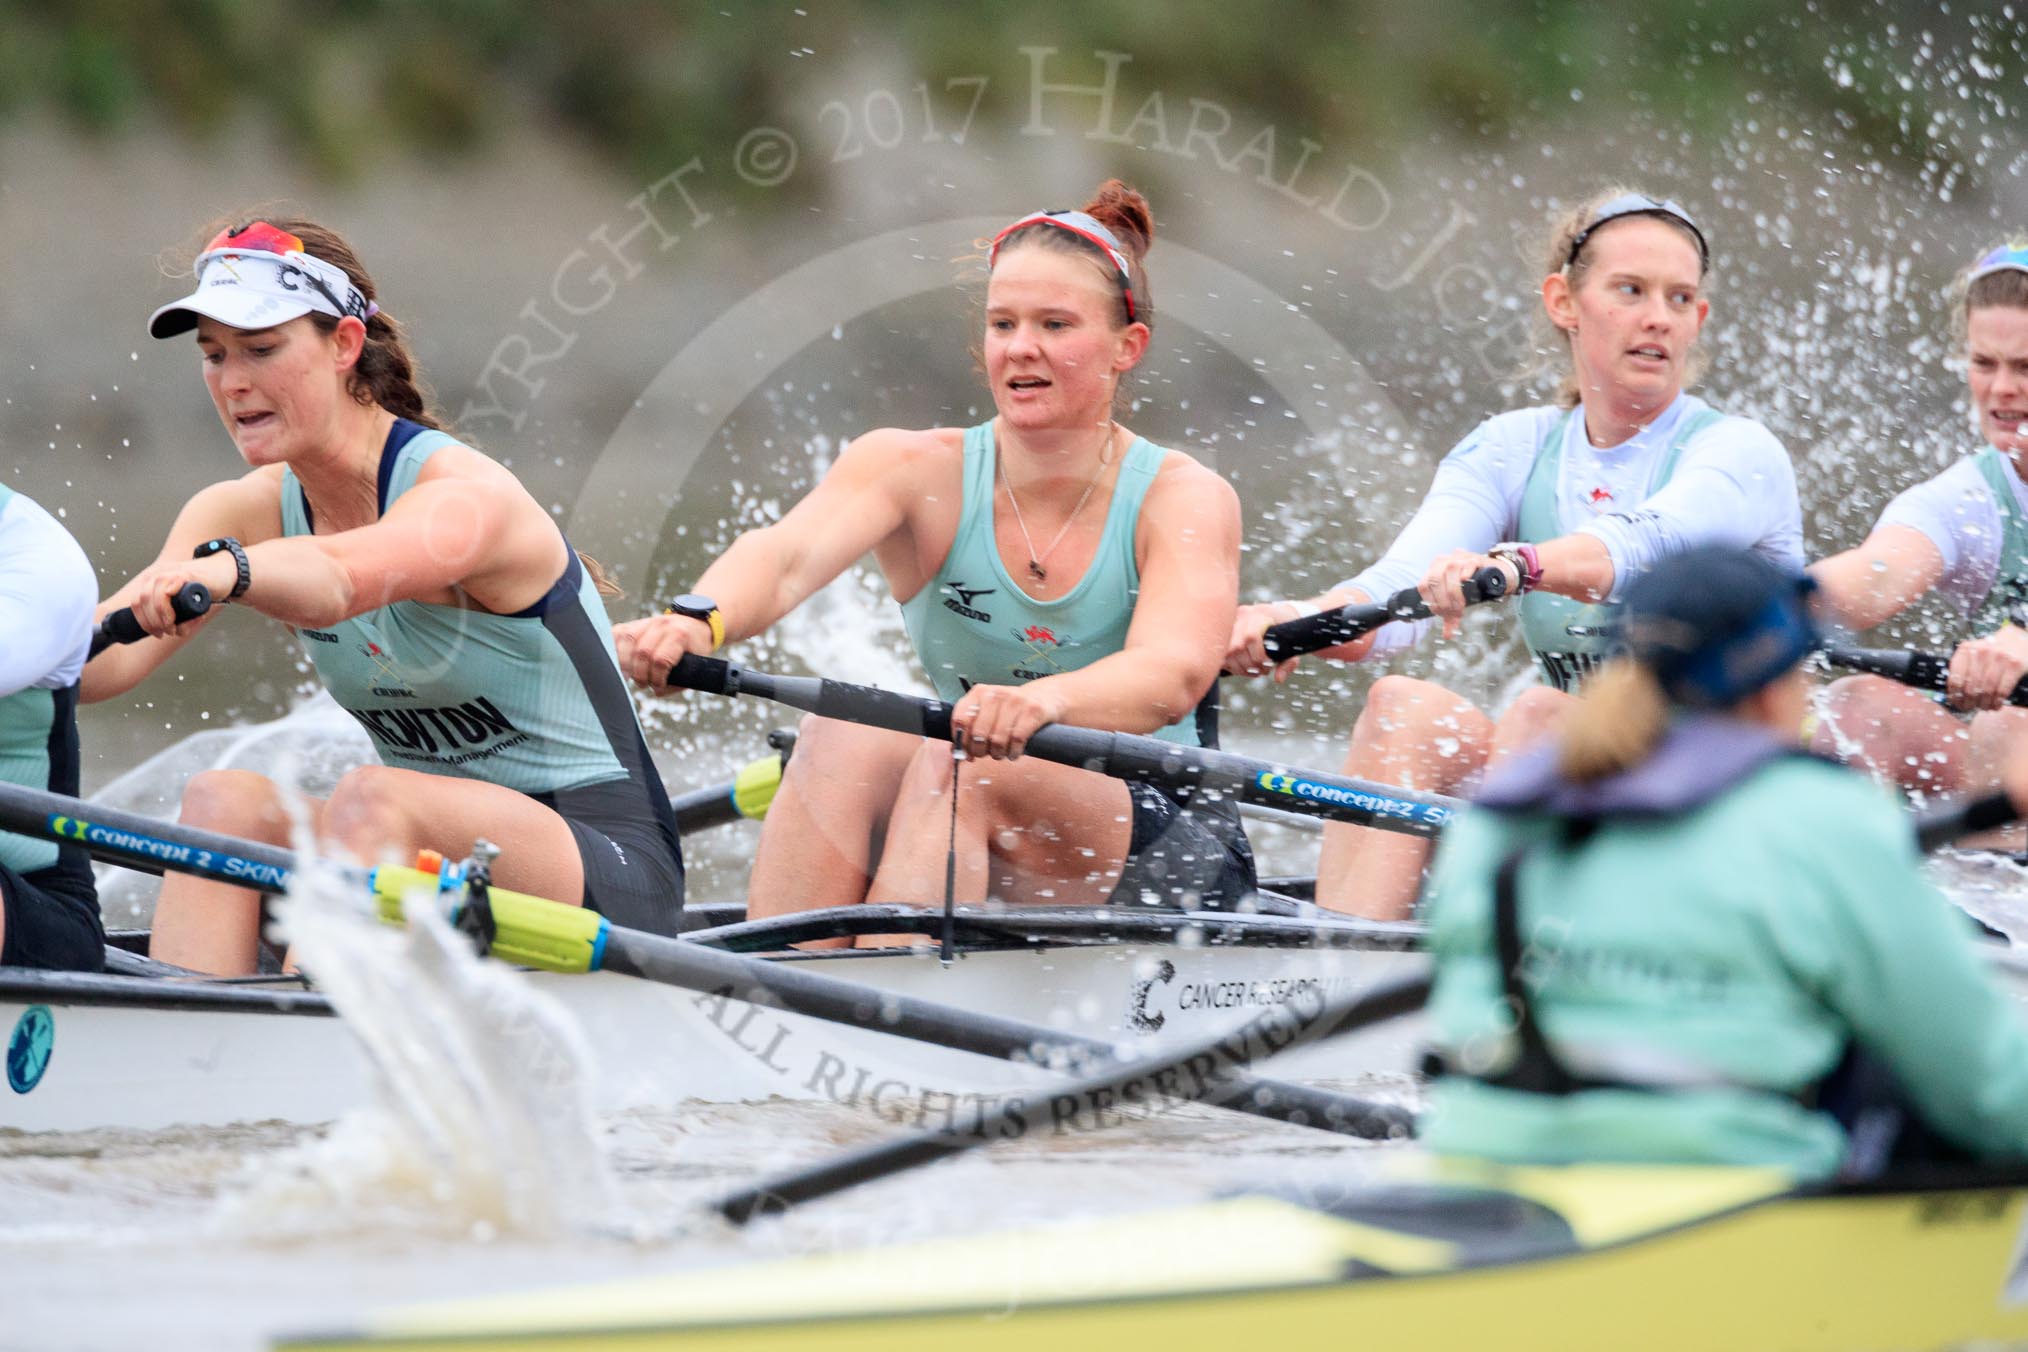 The Boat Race season 2018 - Women's Boat Race Trial Eights (CUWBC, Cambridge): A close fight betwwen the two Cambridge crews,6 Thea Zabell, 5 Kelsey Barolak, 4 Laura Foster, 3 Sally O Brien in Expecto Patronum , cox Sophie Wrixon and stroke Imogen Grant in Wingardium Leviosa.
River Thames between Putney Bridge and Mortlake,
London SW15,

United Kingdom,
on 05 December 2017 at 12:50, image #109